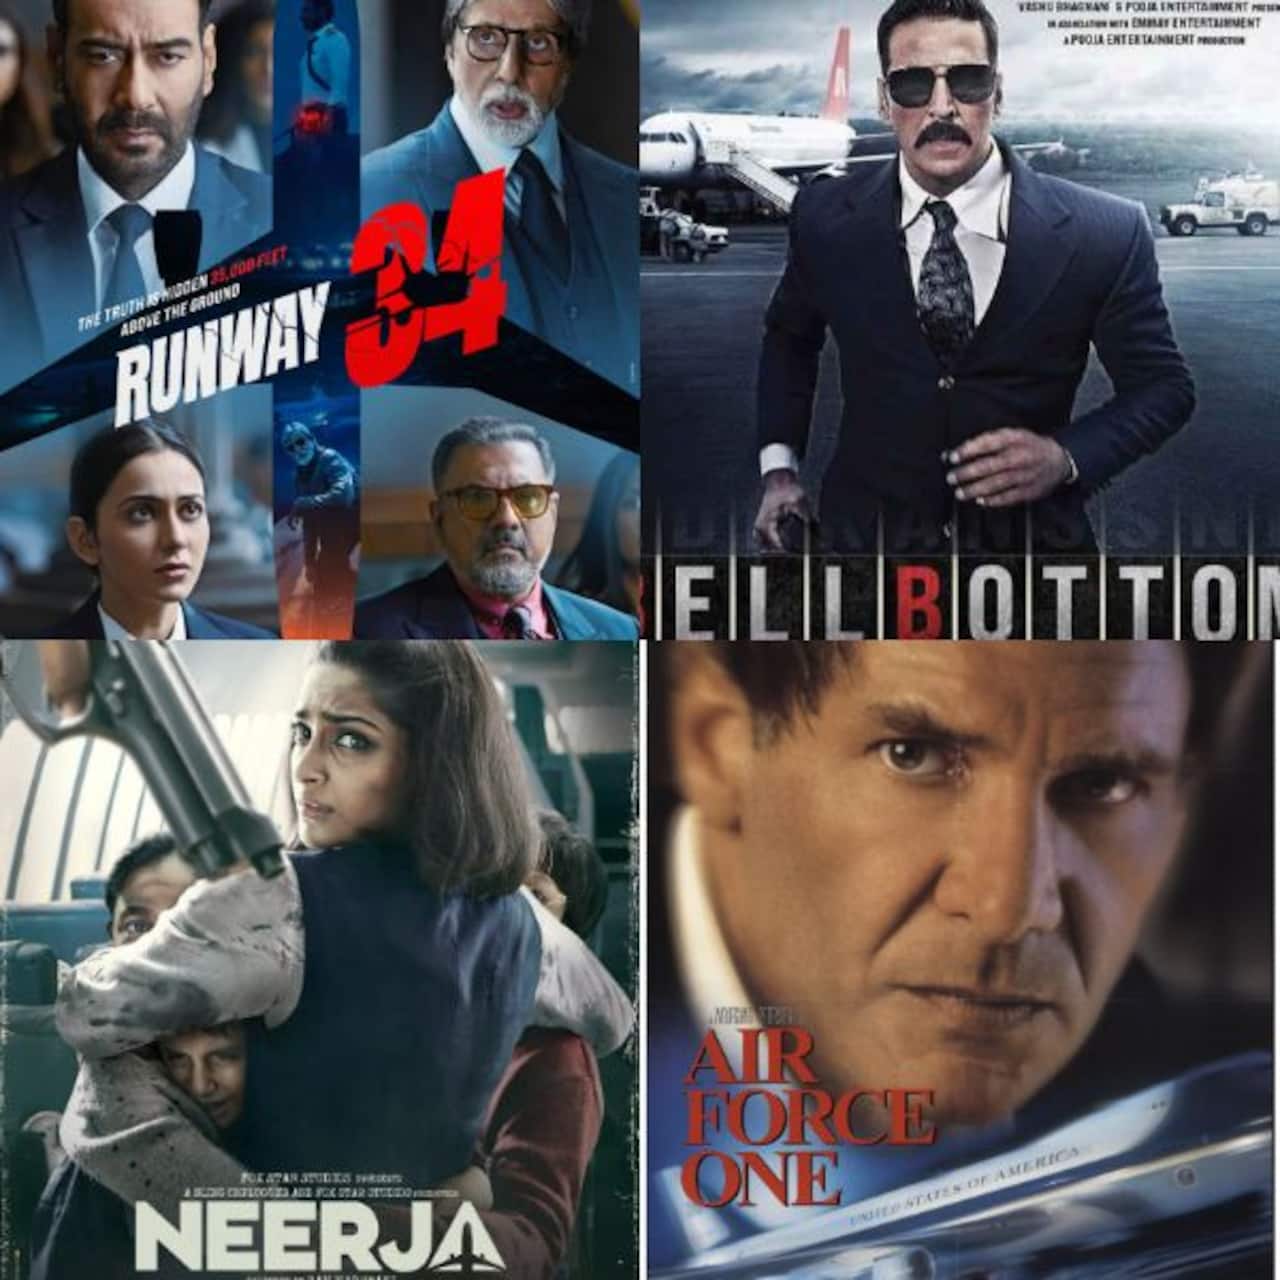 What to watch on OTT today: Before Runway 34, check out Neerja, Bell Bottom, Air Force One and more mid-air thrillers on Netflix, Hotstar and other OTT platforms